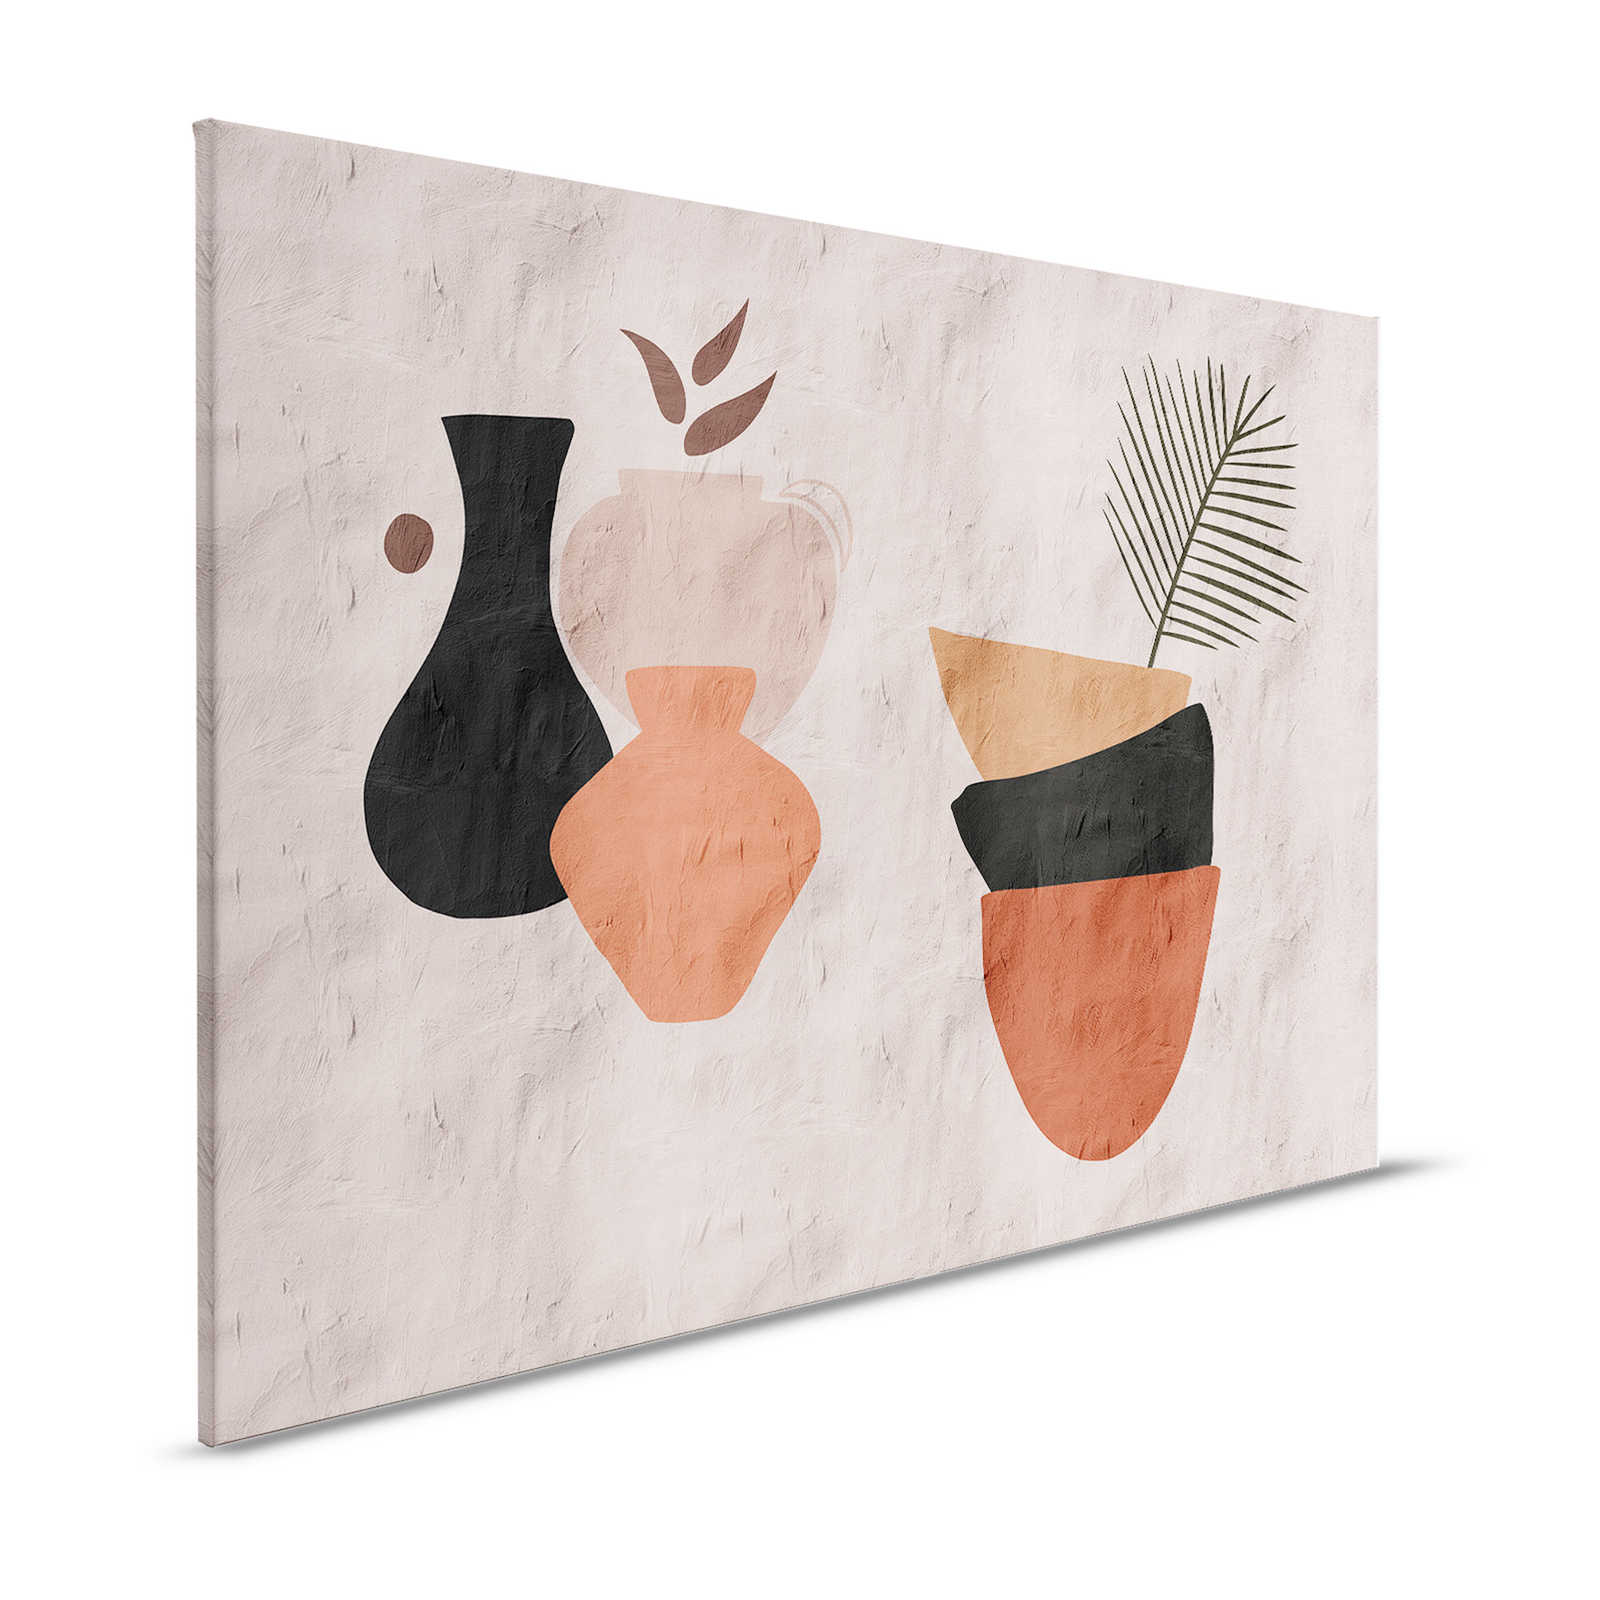 Santa Fe 2 - Clay Wall Canvas Painting with Colour Block Design - 1.20 m x 0.80 m
